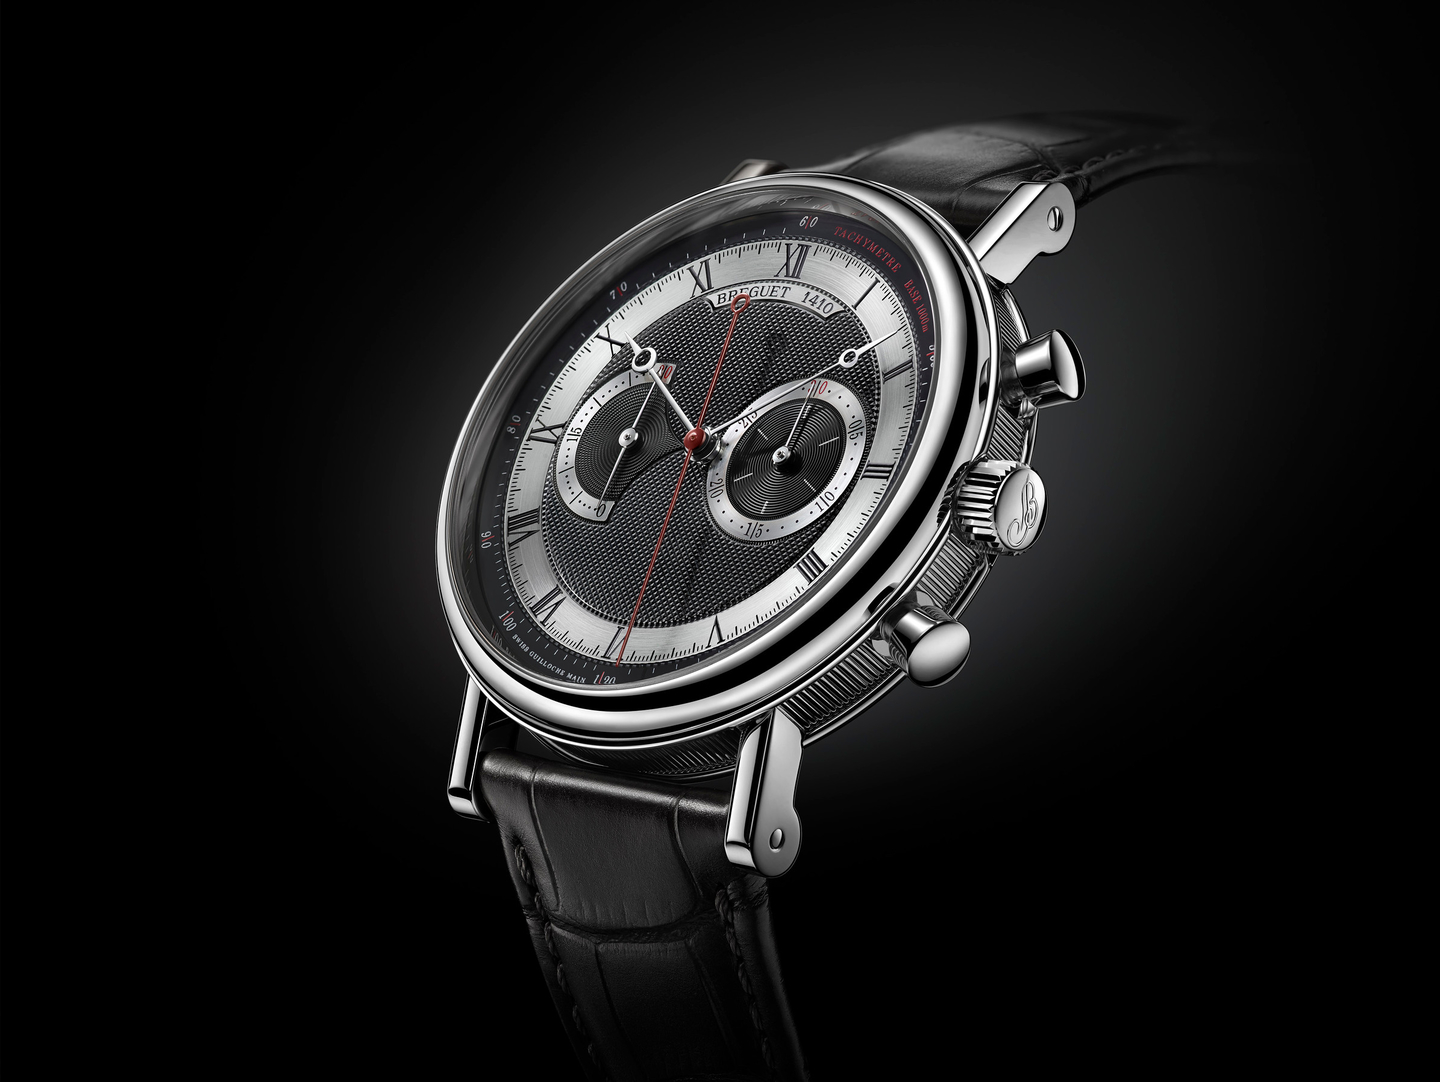 Quick Look: The Breguet Classique Chronograph 5287 with black dial